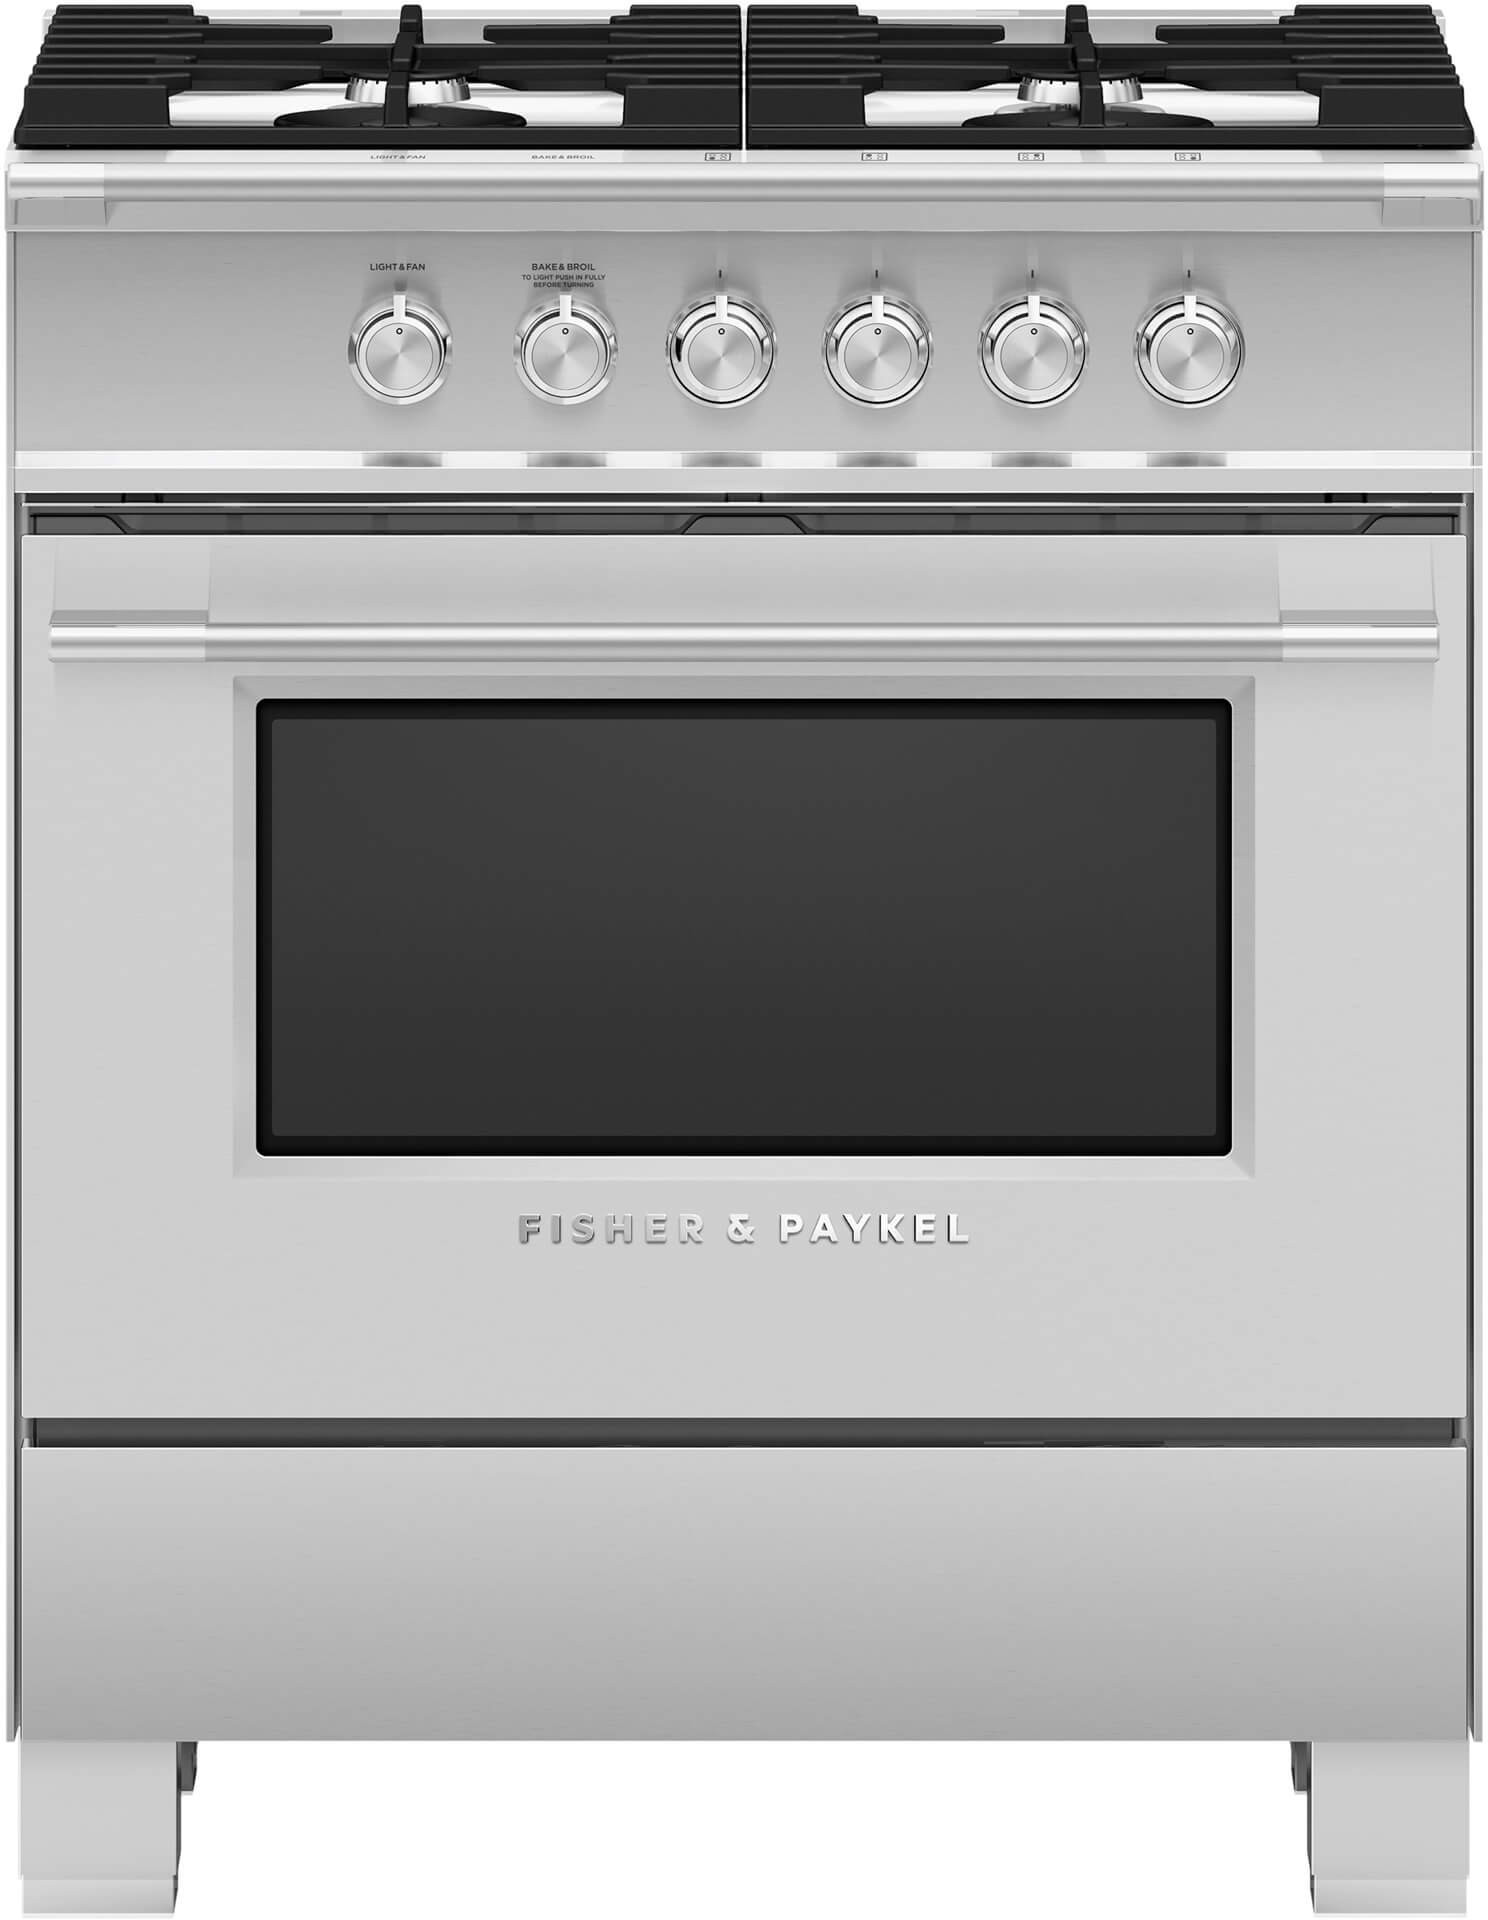 Fisher & Paykel Series 7 classic 30 Freestanding Natural Gas Range OR30SCG4X1